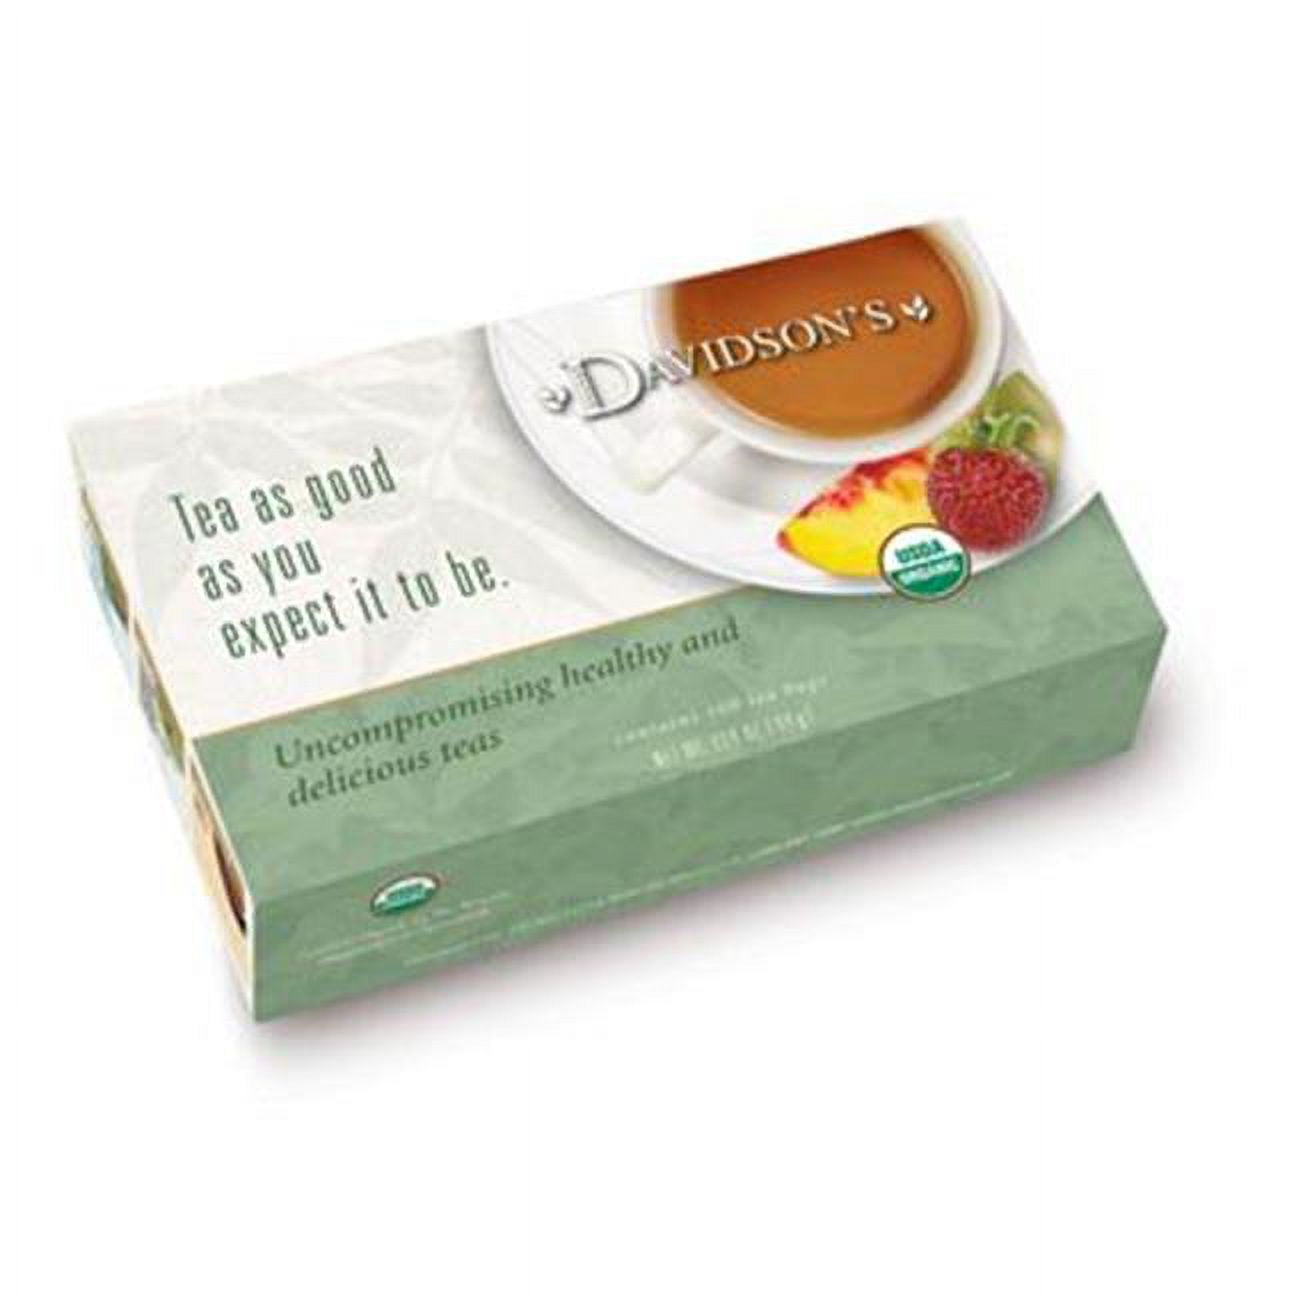 Picture of Davidsons Organic Teas 211 100 Unwrapped Assam Banaspaty Tea Filter Bags - Box of 100